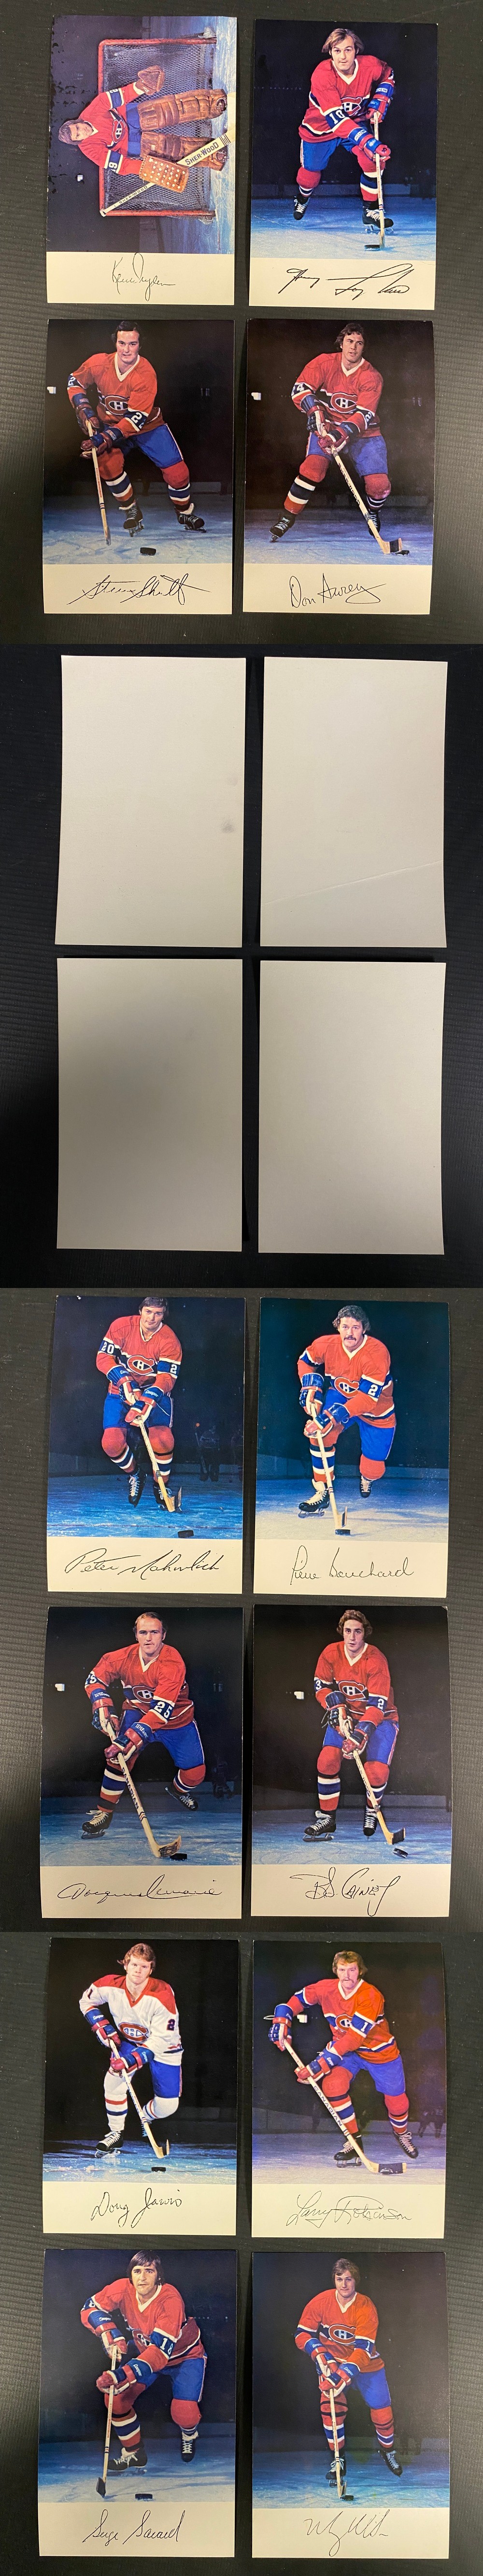 1975-76 MONTREAL CANADIENS TEAM POST CARD FULL SET 20/20 photo